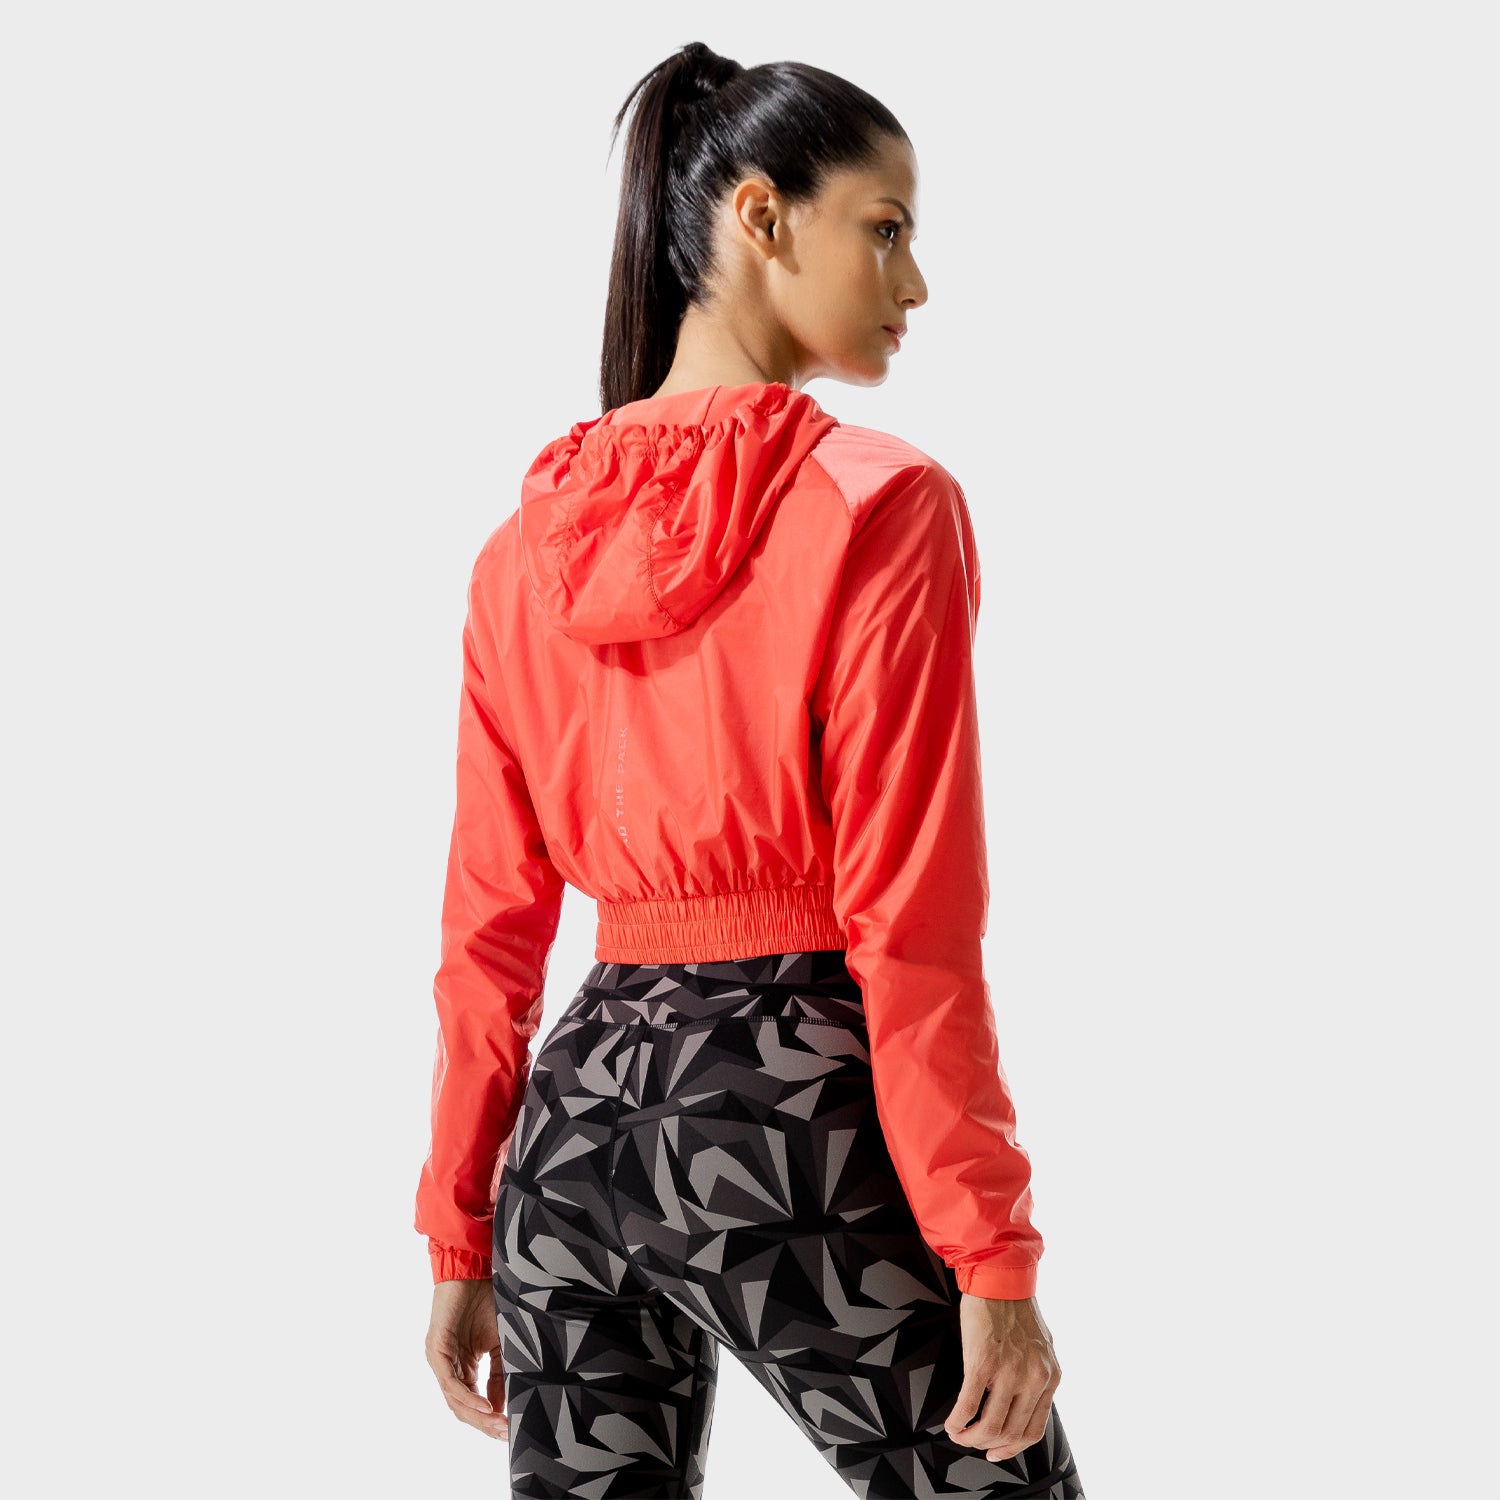 squatwolf-gym-hoodies-women-lab-360-crop-jacket-hot-coral-workout-clothes